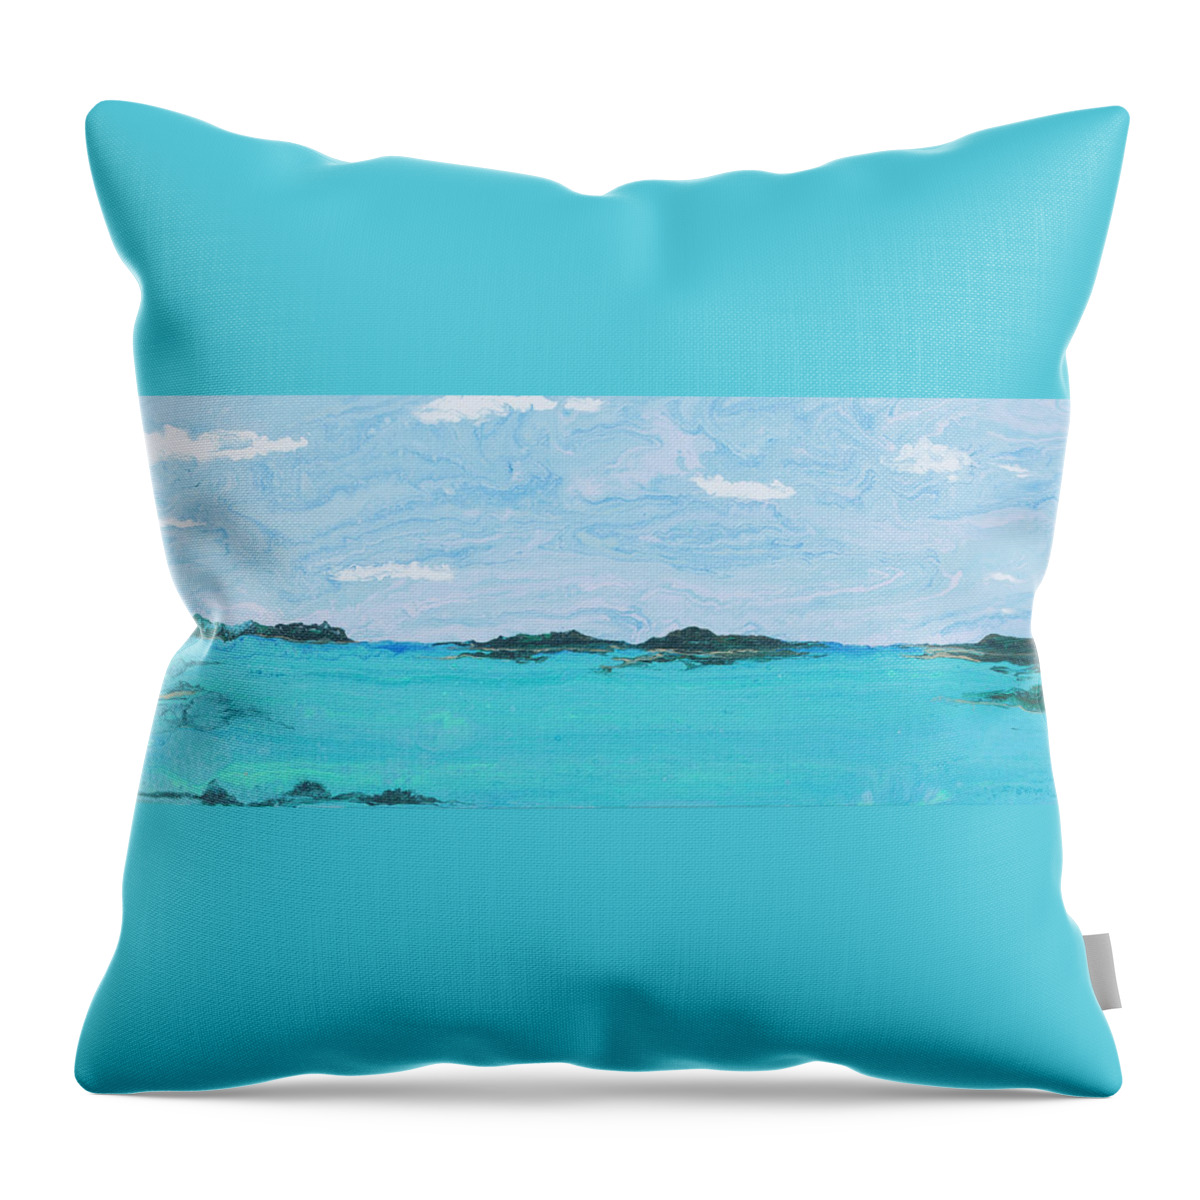 Seascape Throw Pillow featuring the painting East Harbor Key Channel by Steve Shaw